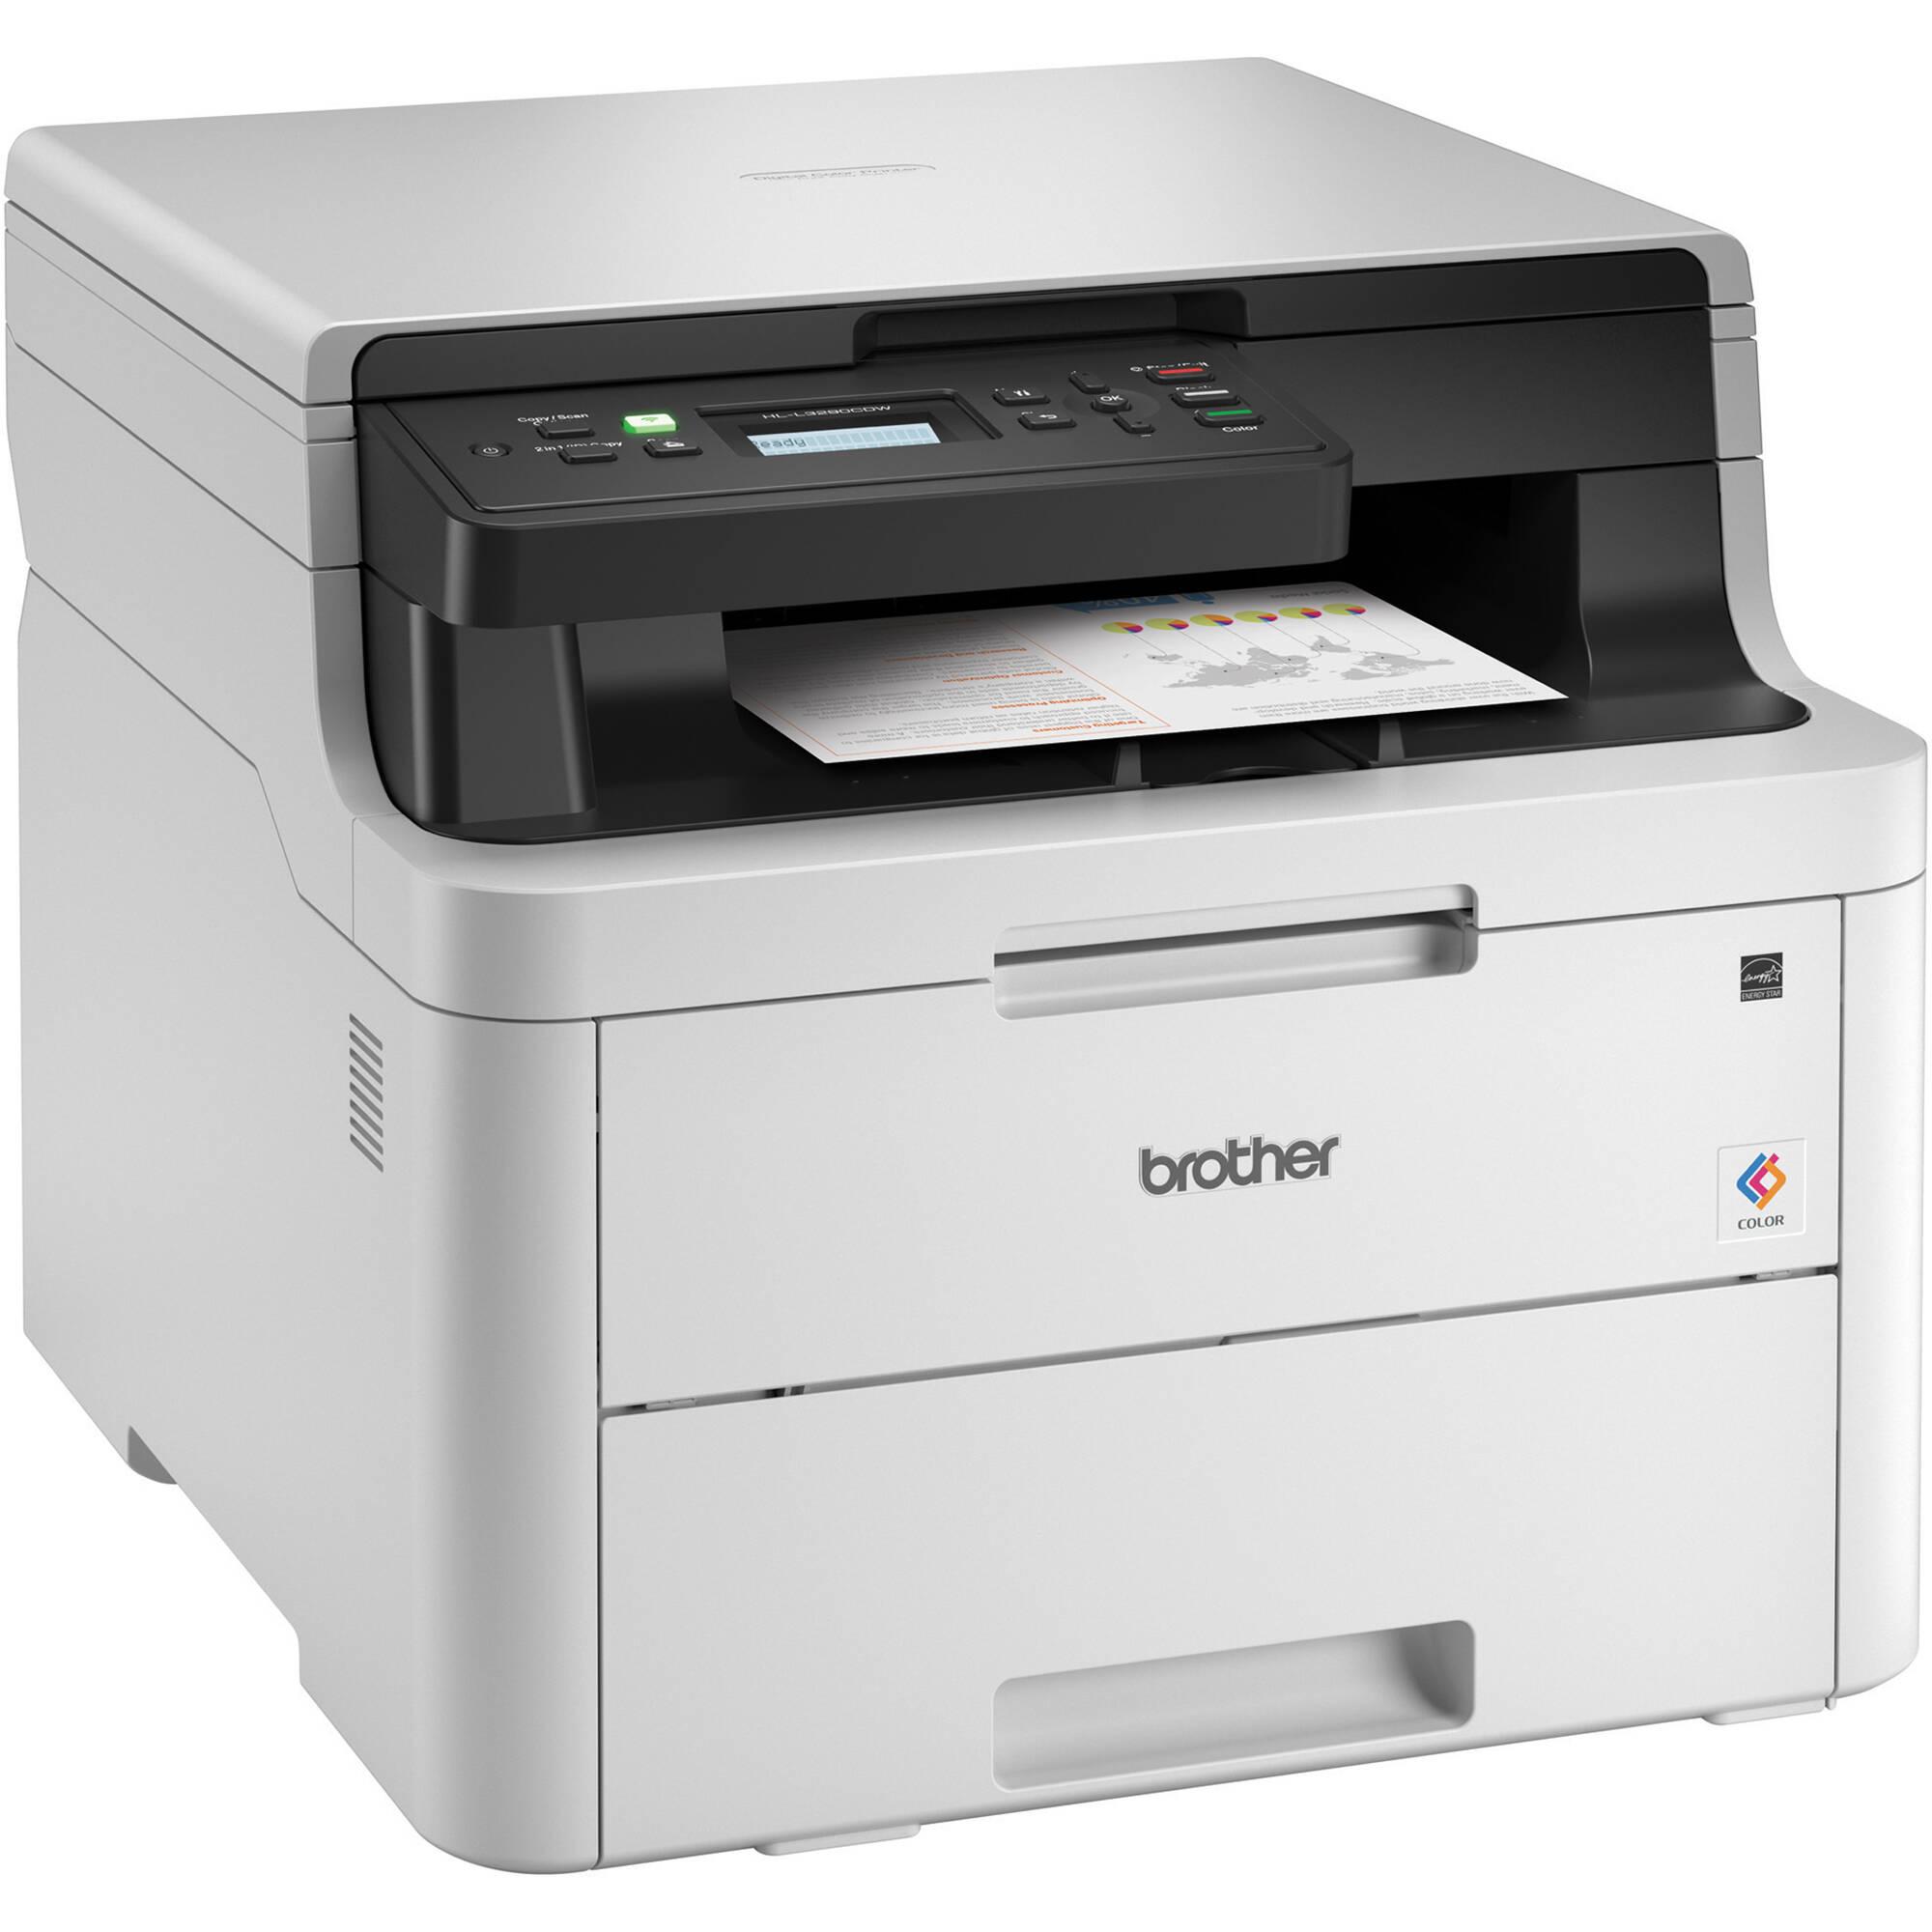 Brother RHLL3290CDW Color Laser Wireless Multifunction Printer for $280.24 Shipped